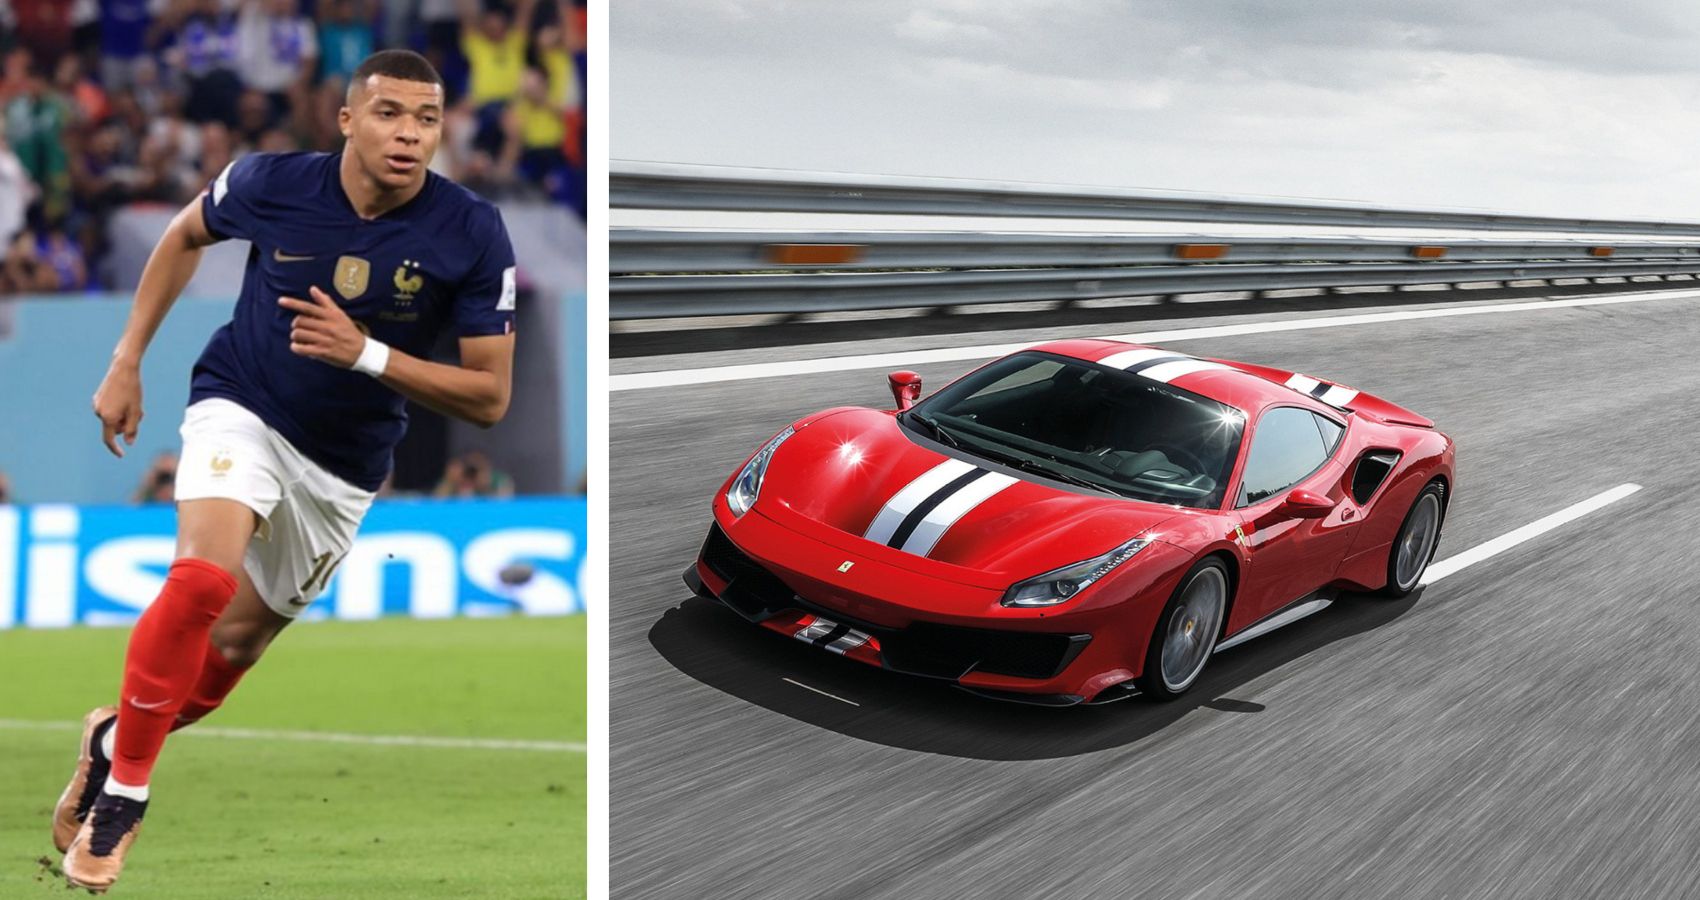 Image Of Football Star Mbappe And A Ferrari 488 Pista